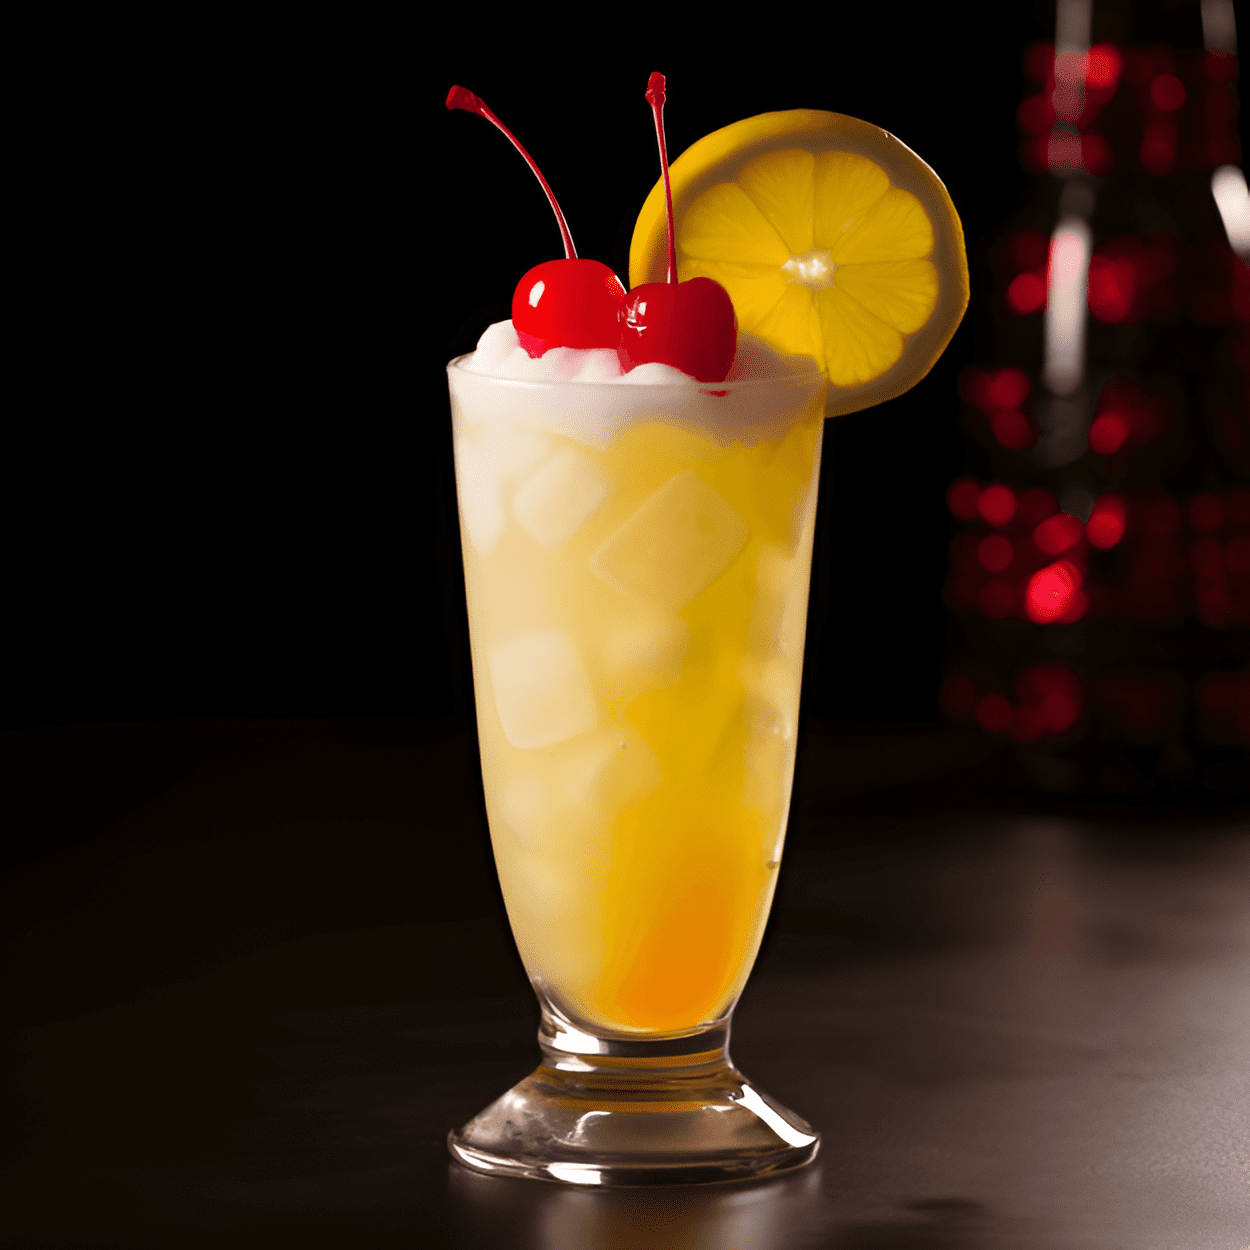 Chi-Chi Cocktail Recipe - The Chi-Chi cocktail is a sweet, creamy, and refreshing drink with a hint of tartness from the pineapple juice. It has a smooth, velvety texture and a well-balanced flavor profile that combines fruity, tropical notes with a subtle hint of coconut.